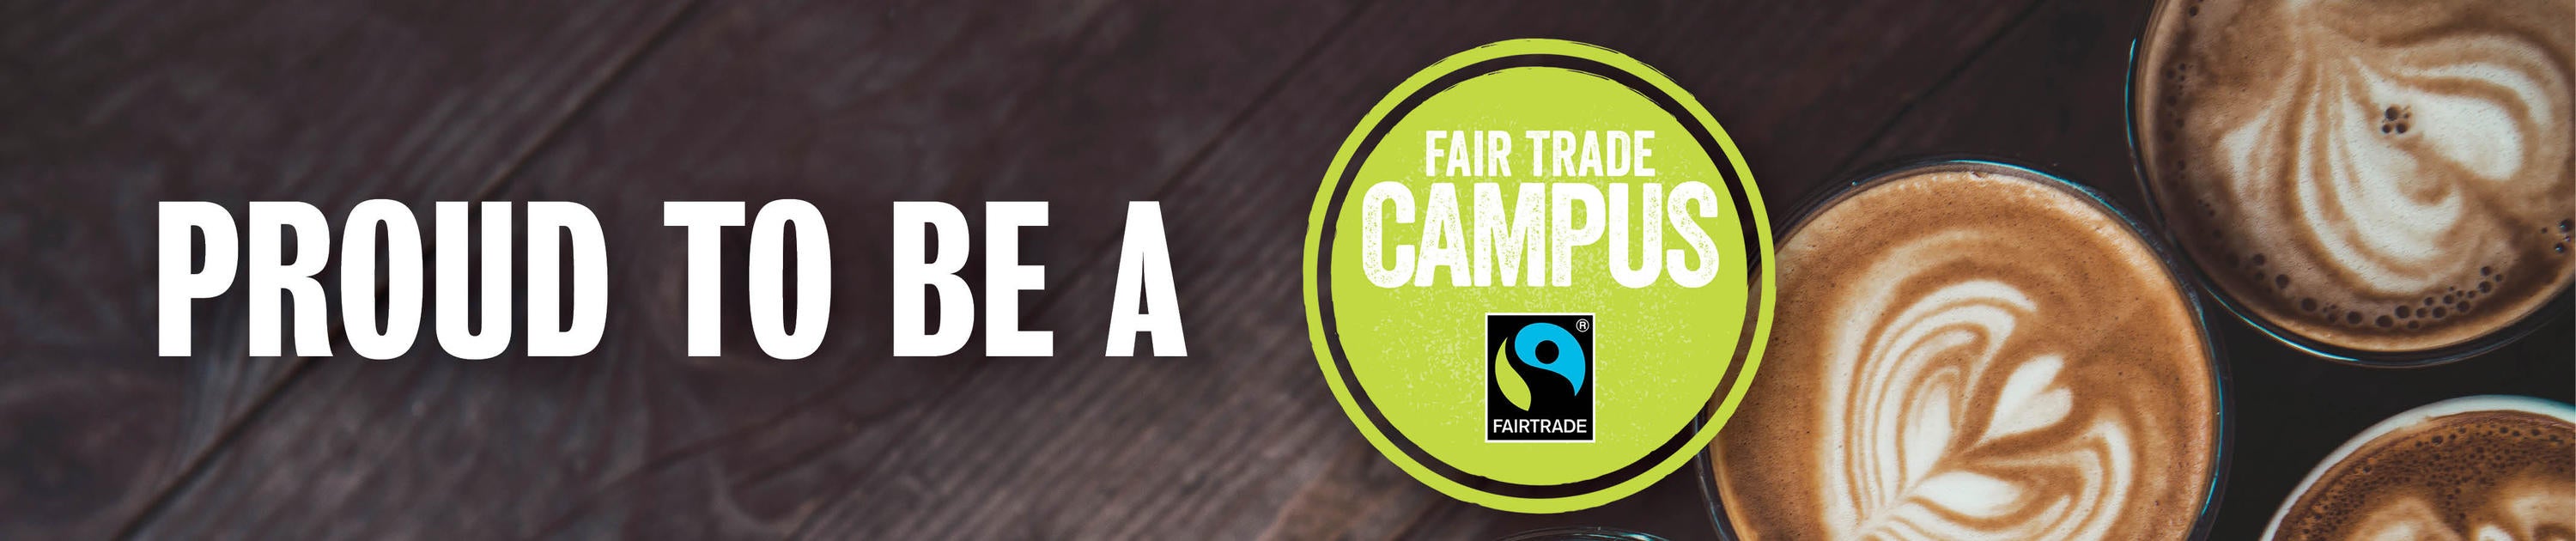 Proud to be a Fair Trade Campus banner